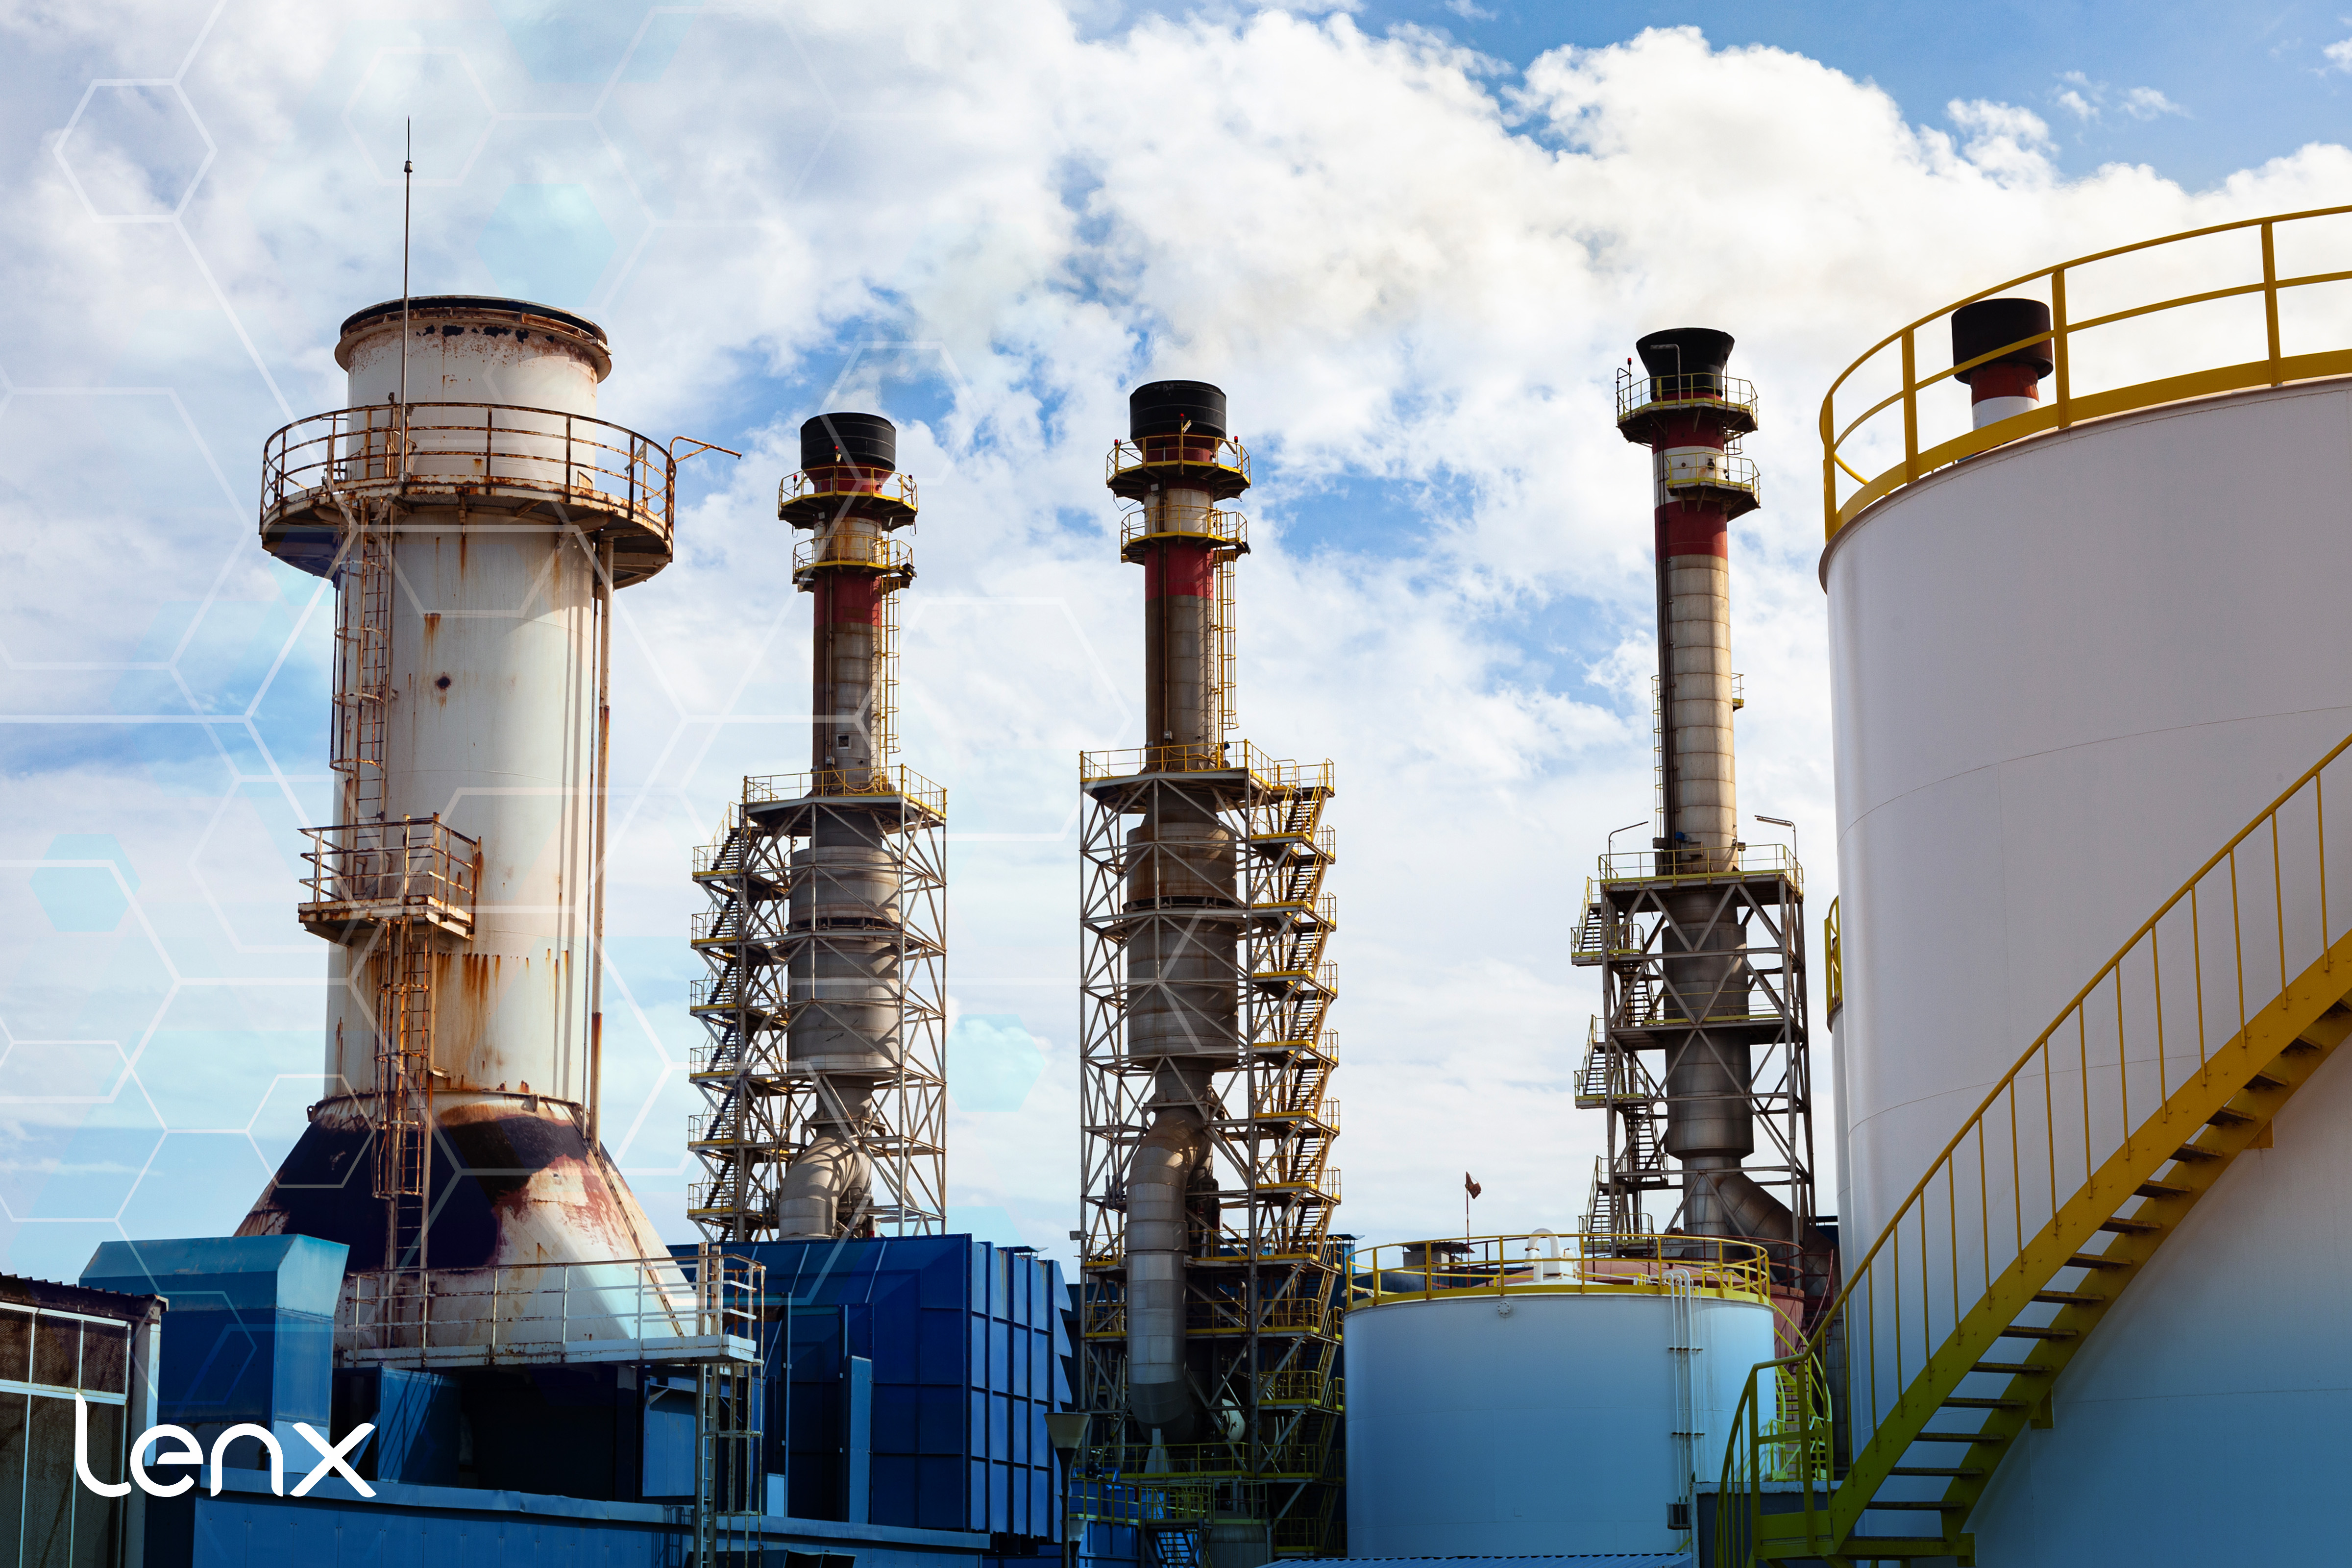 AI Security and Active Shooter Detection for Plants and Refineries